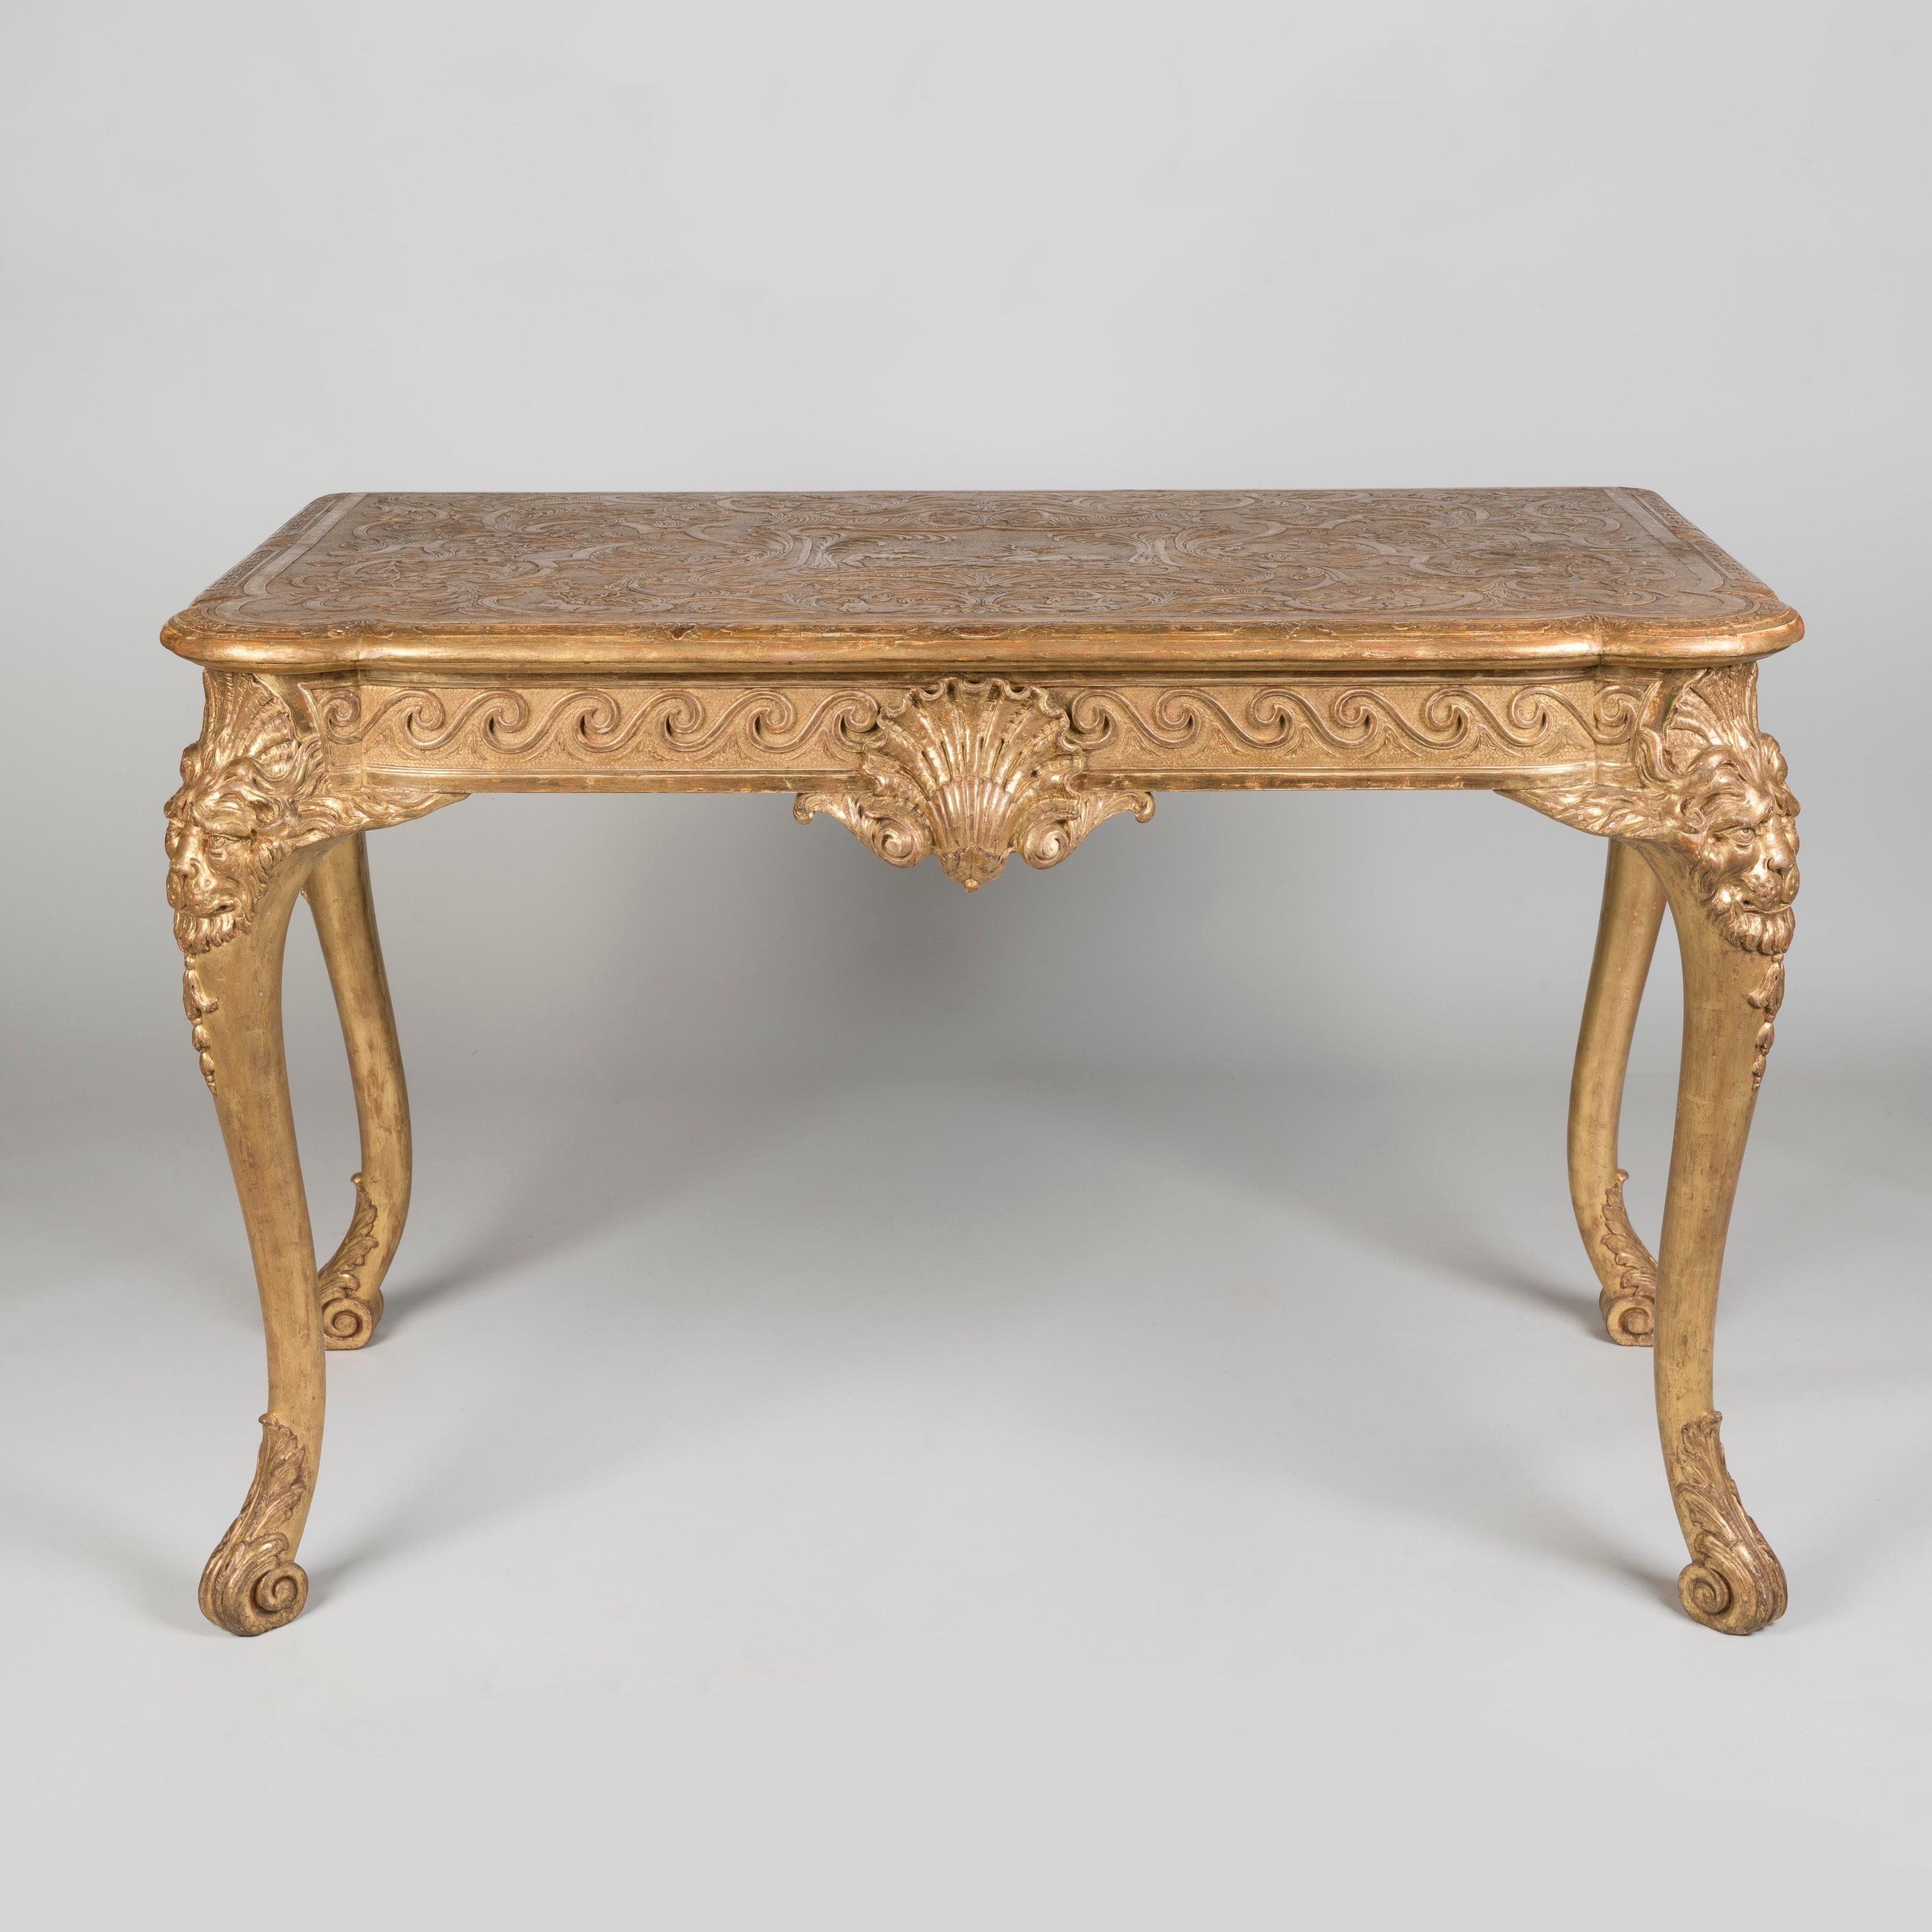 A Handsome Gilt console table of Early Georgian Style

The whole, gilt: the shaped and lobed cornered top of carved gesso having in the centre the figures of Diana and a stag in a cartouche: the stag and deer motif repeating among the copious